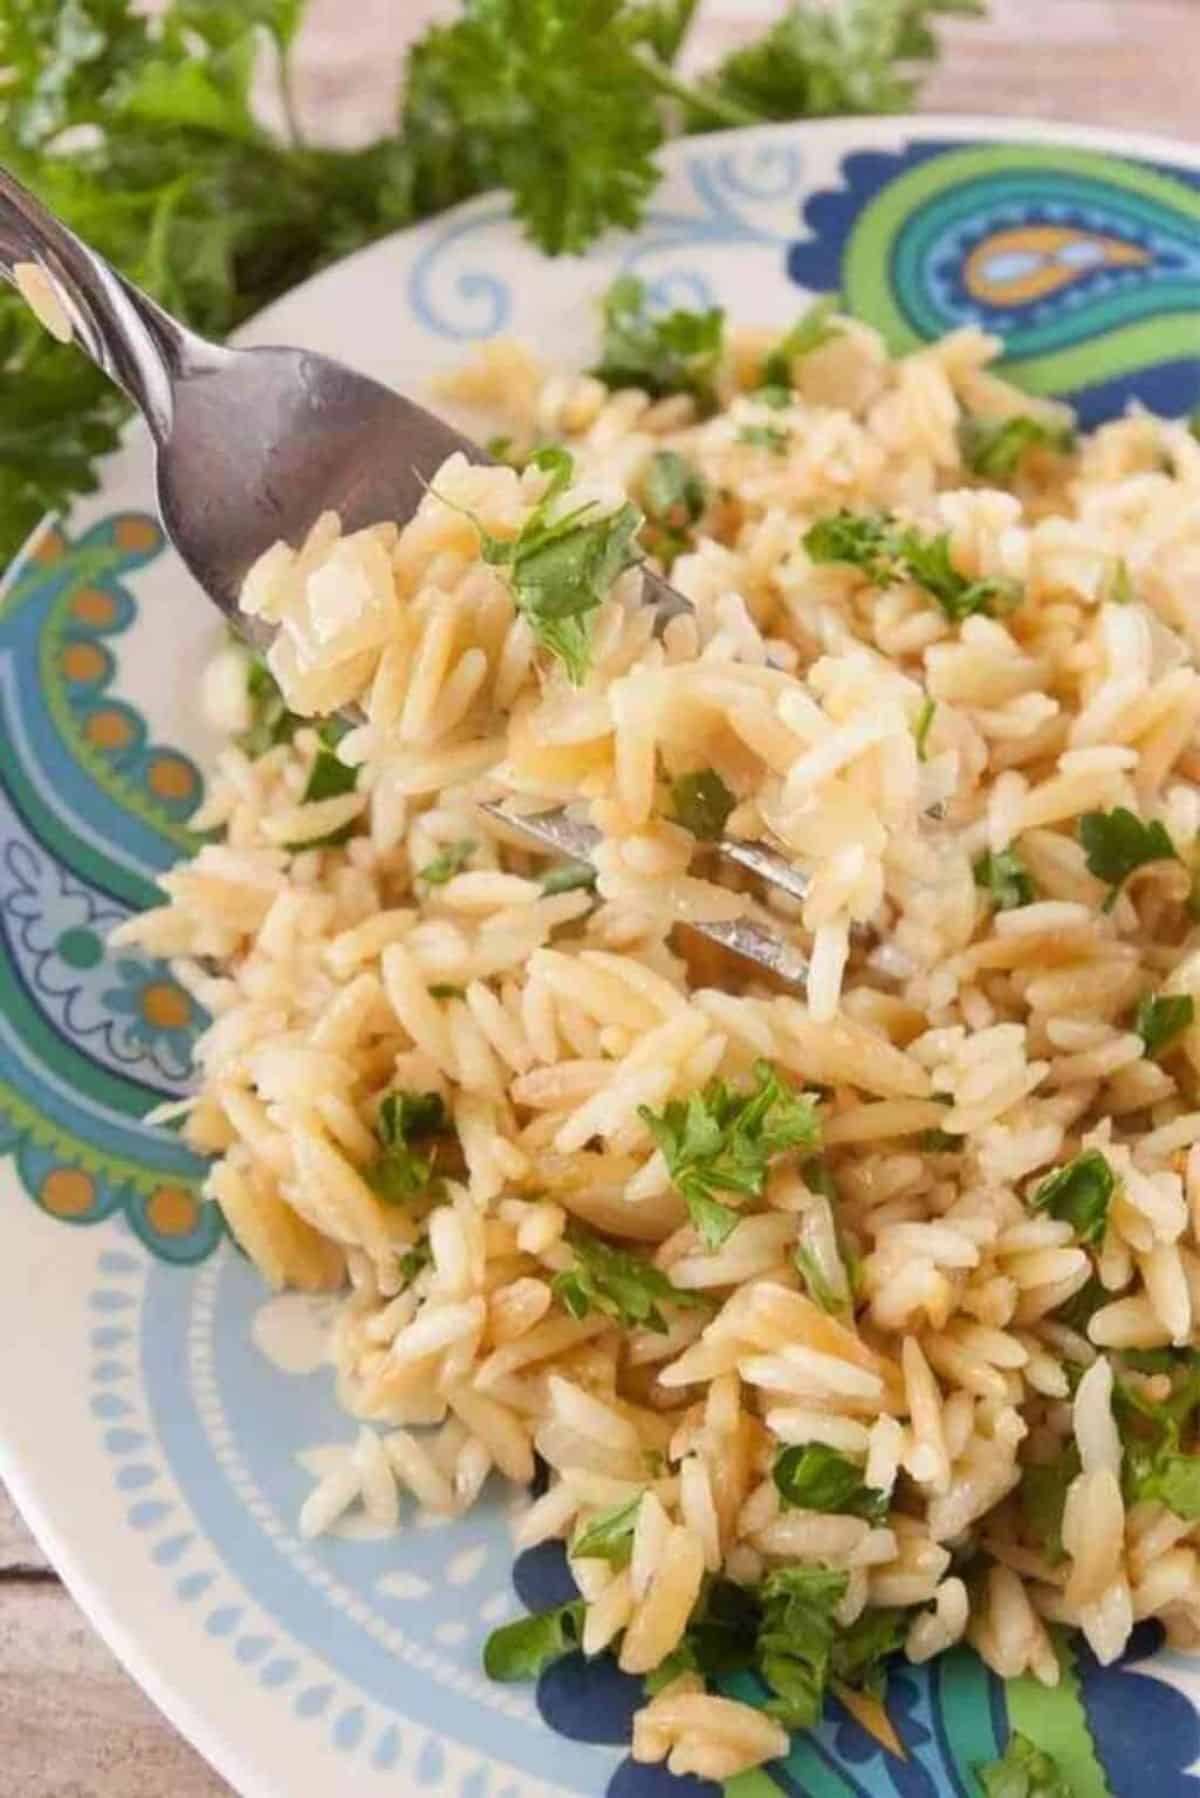 Orzo Rice Pilaf on a colorful plate picked with a fork.